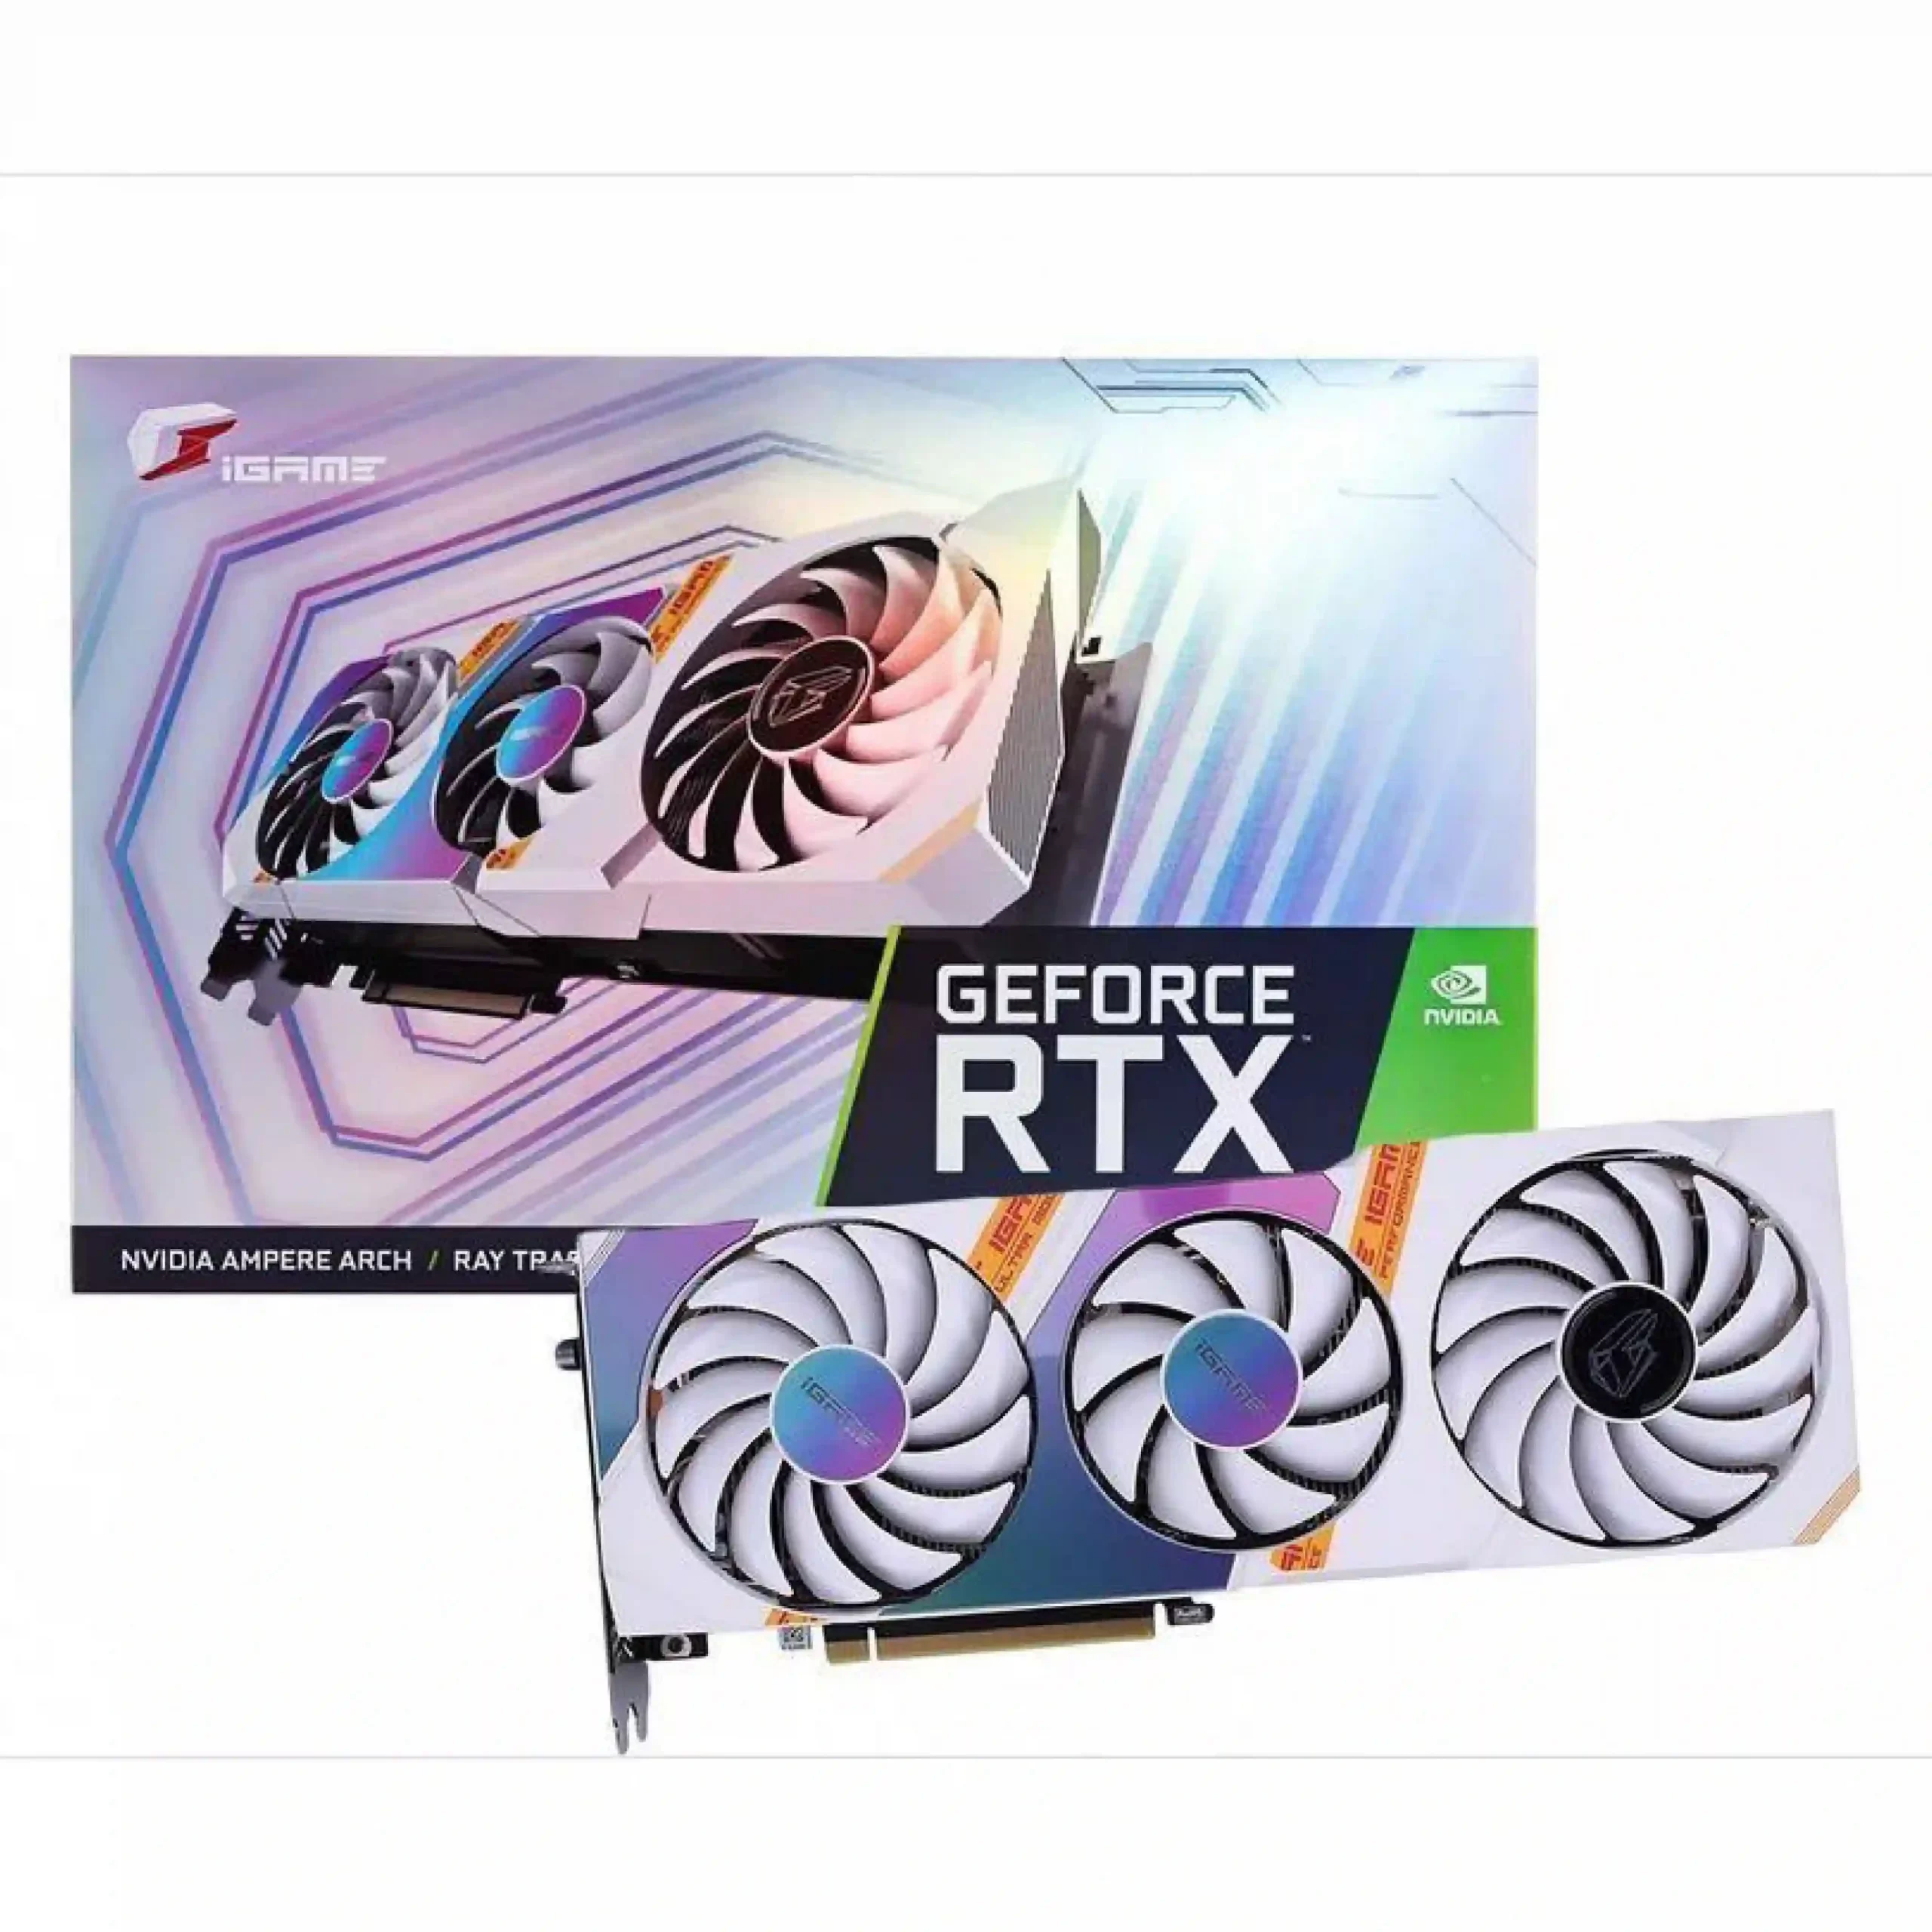 Rtx 3060 colorful ultra w 12g. Colorful IGAME RTX 3060 ti Ultra. Colorful RTX 3060. Colorful RTX 3060 Ultra w OC. (IGAME GEFORCE RTX 3060 Ultra w OC LHR.